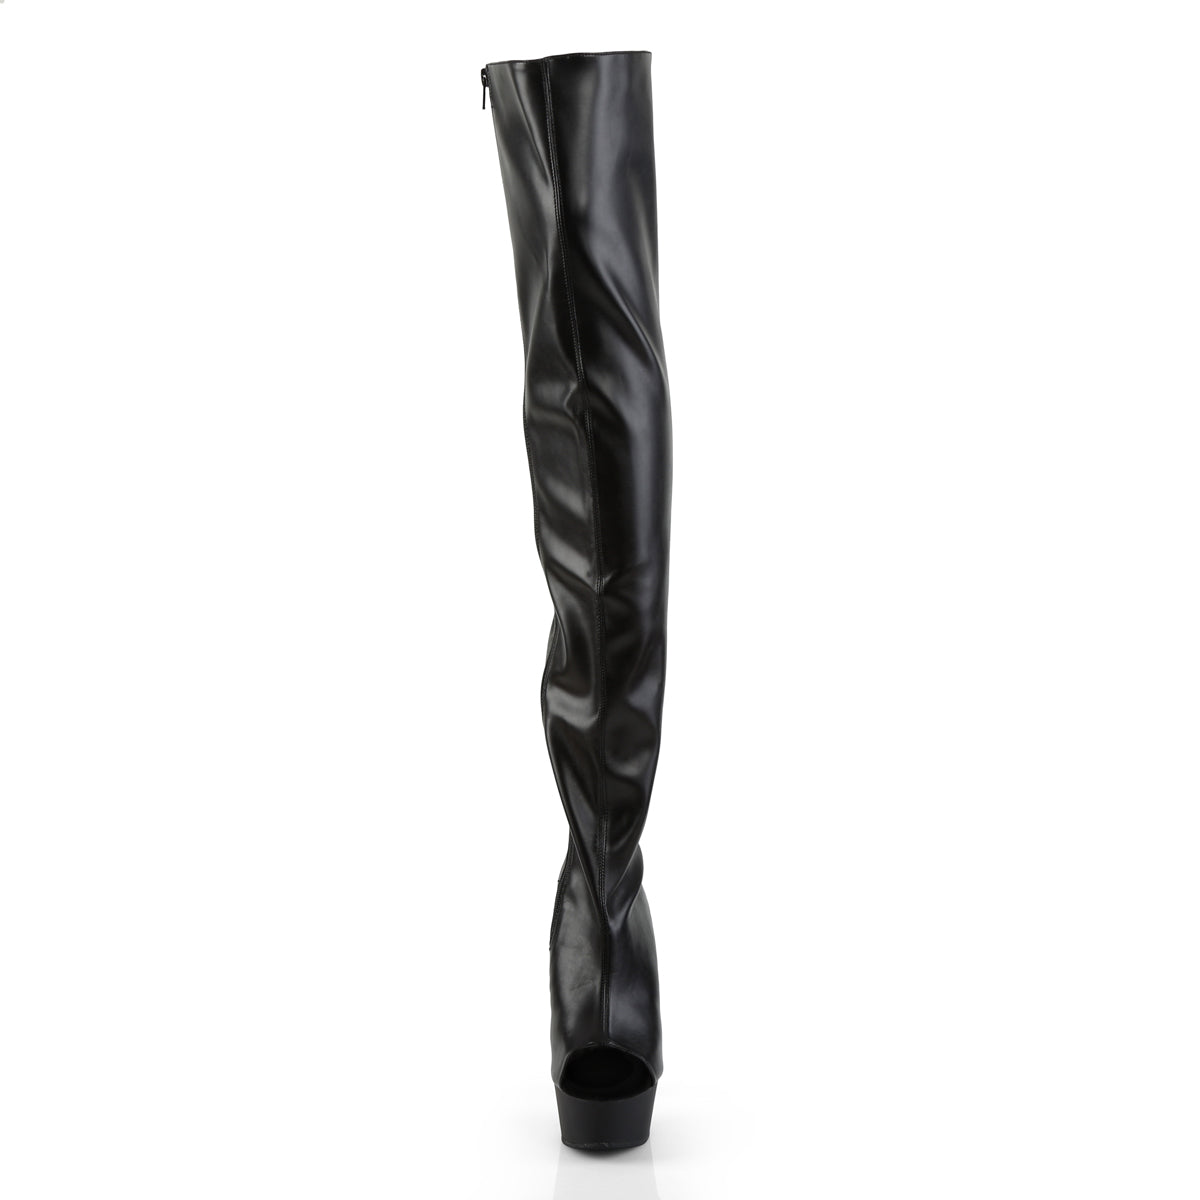 DELIGHT-3017 Pleaser Black Stretch Faux Leather/Black Platform Shoes [Thigh High Boots]